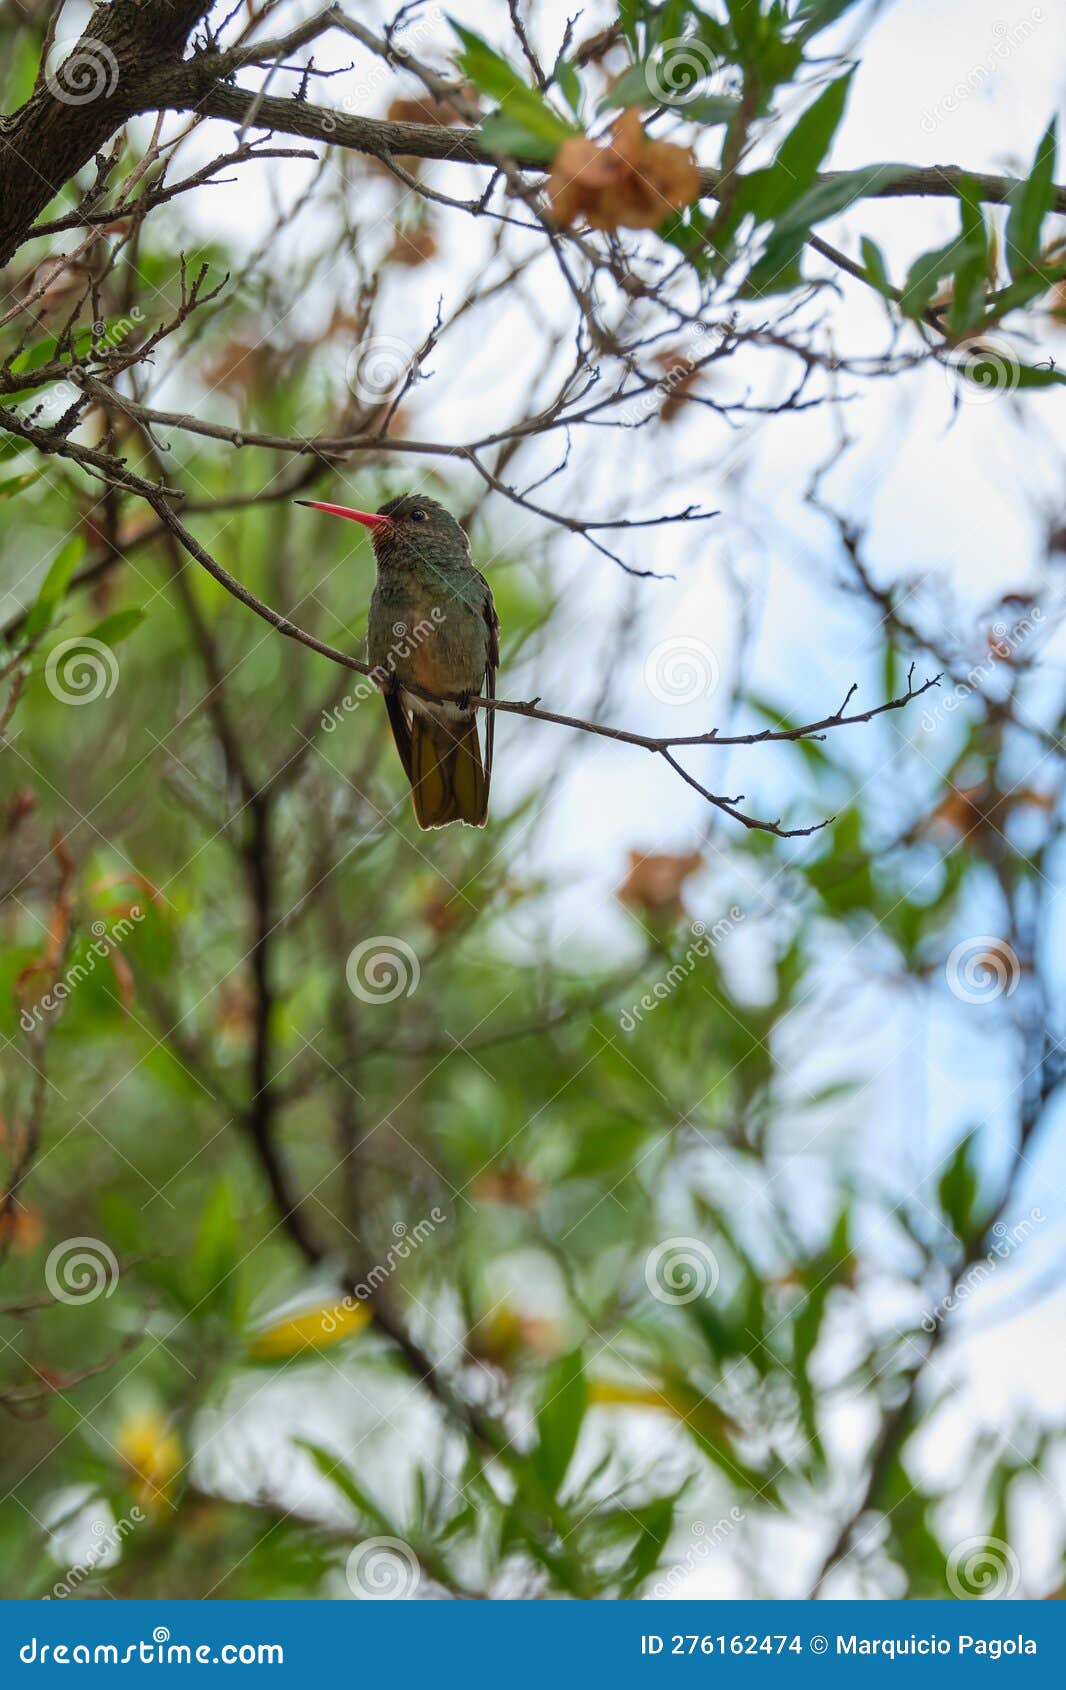 selective focus shot of an exotic bird sitting on a tree branch